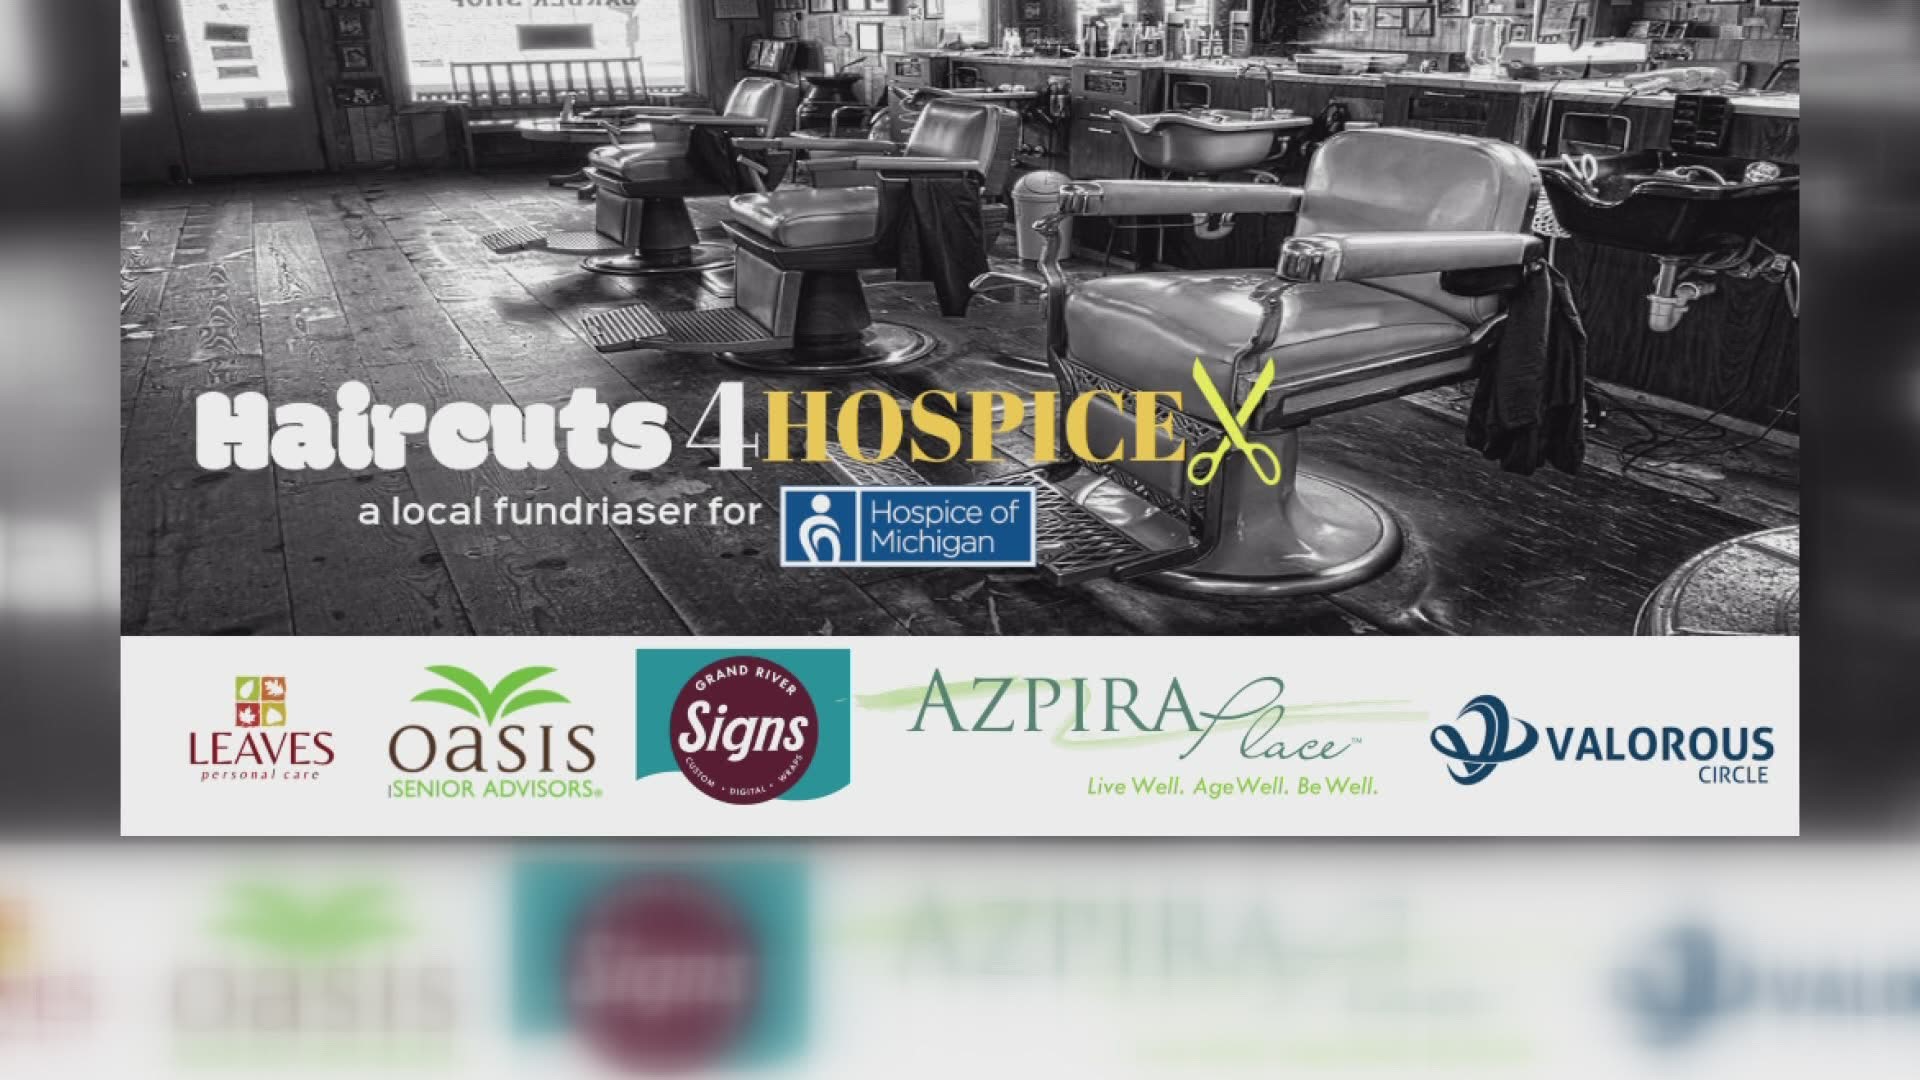 Hospice of Michigan partners and volunteers fill in the gap on cancelled fundraiser amid COVID-19 crisis